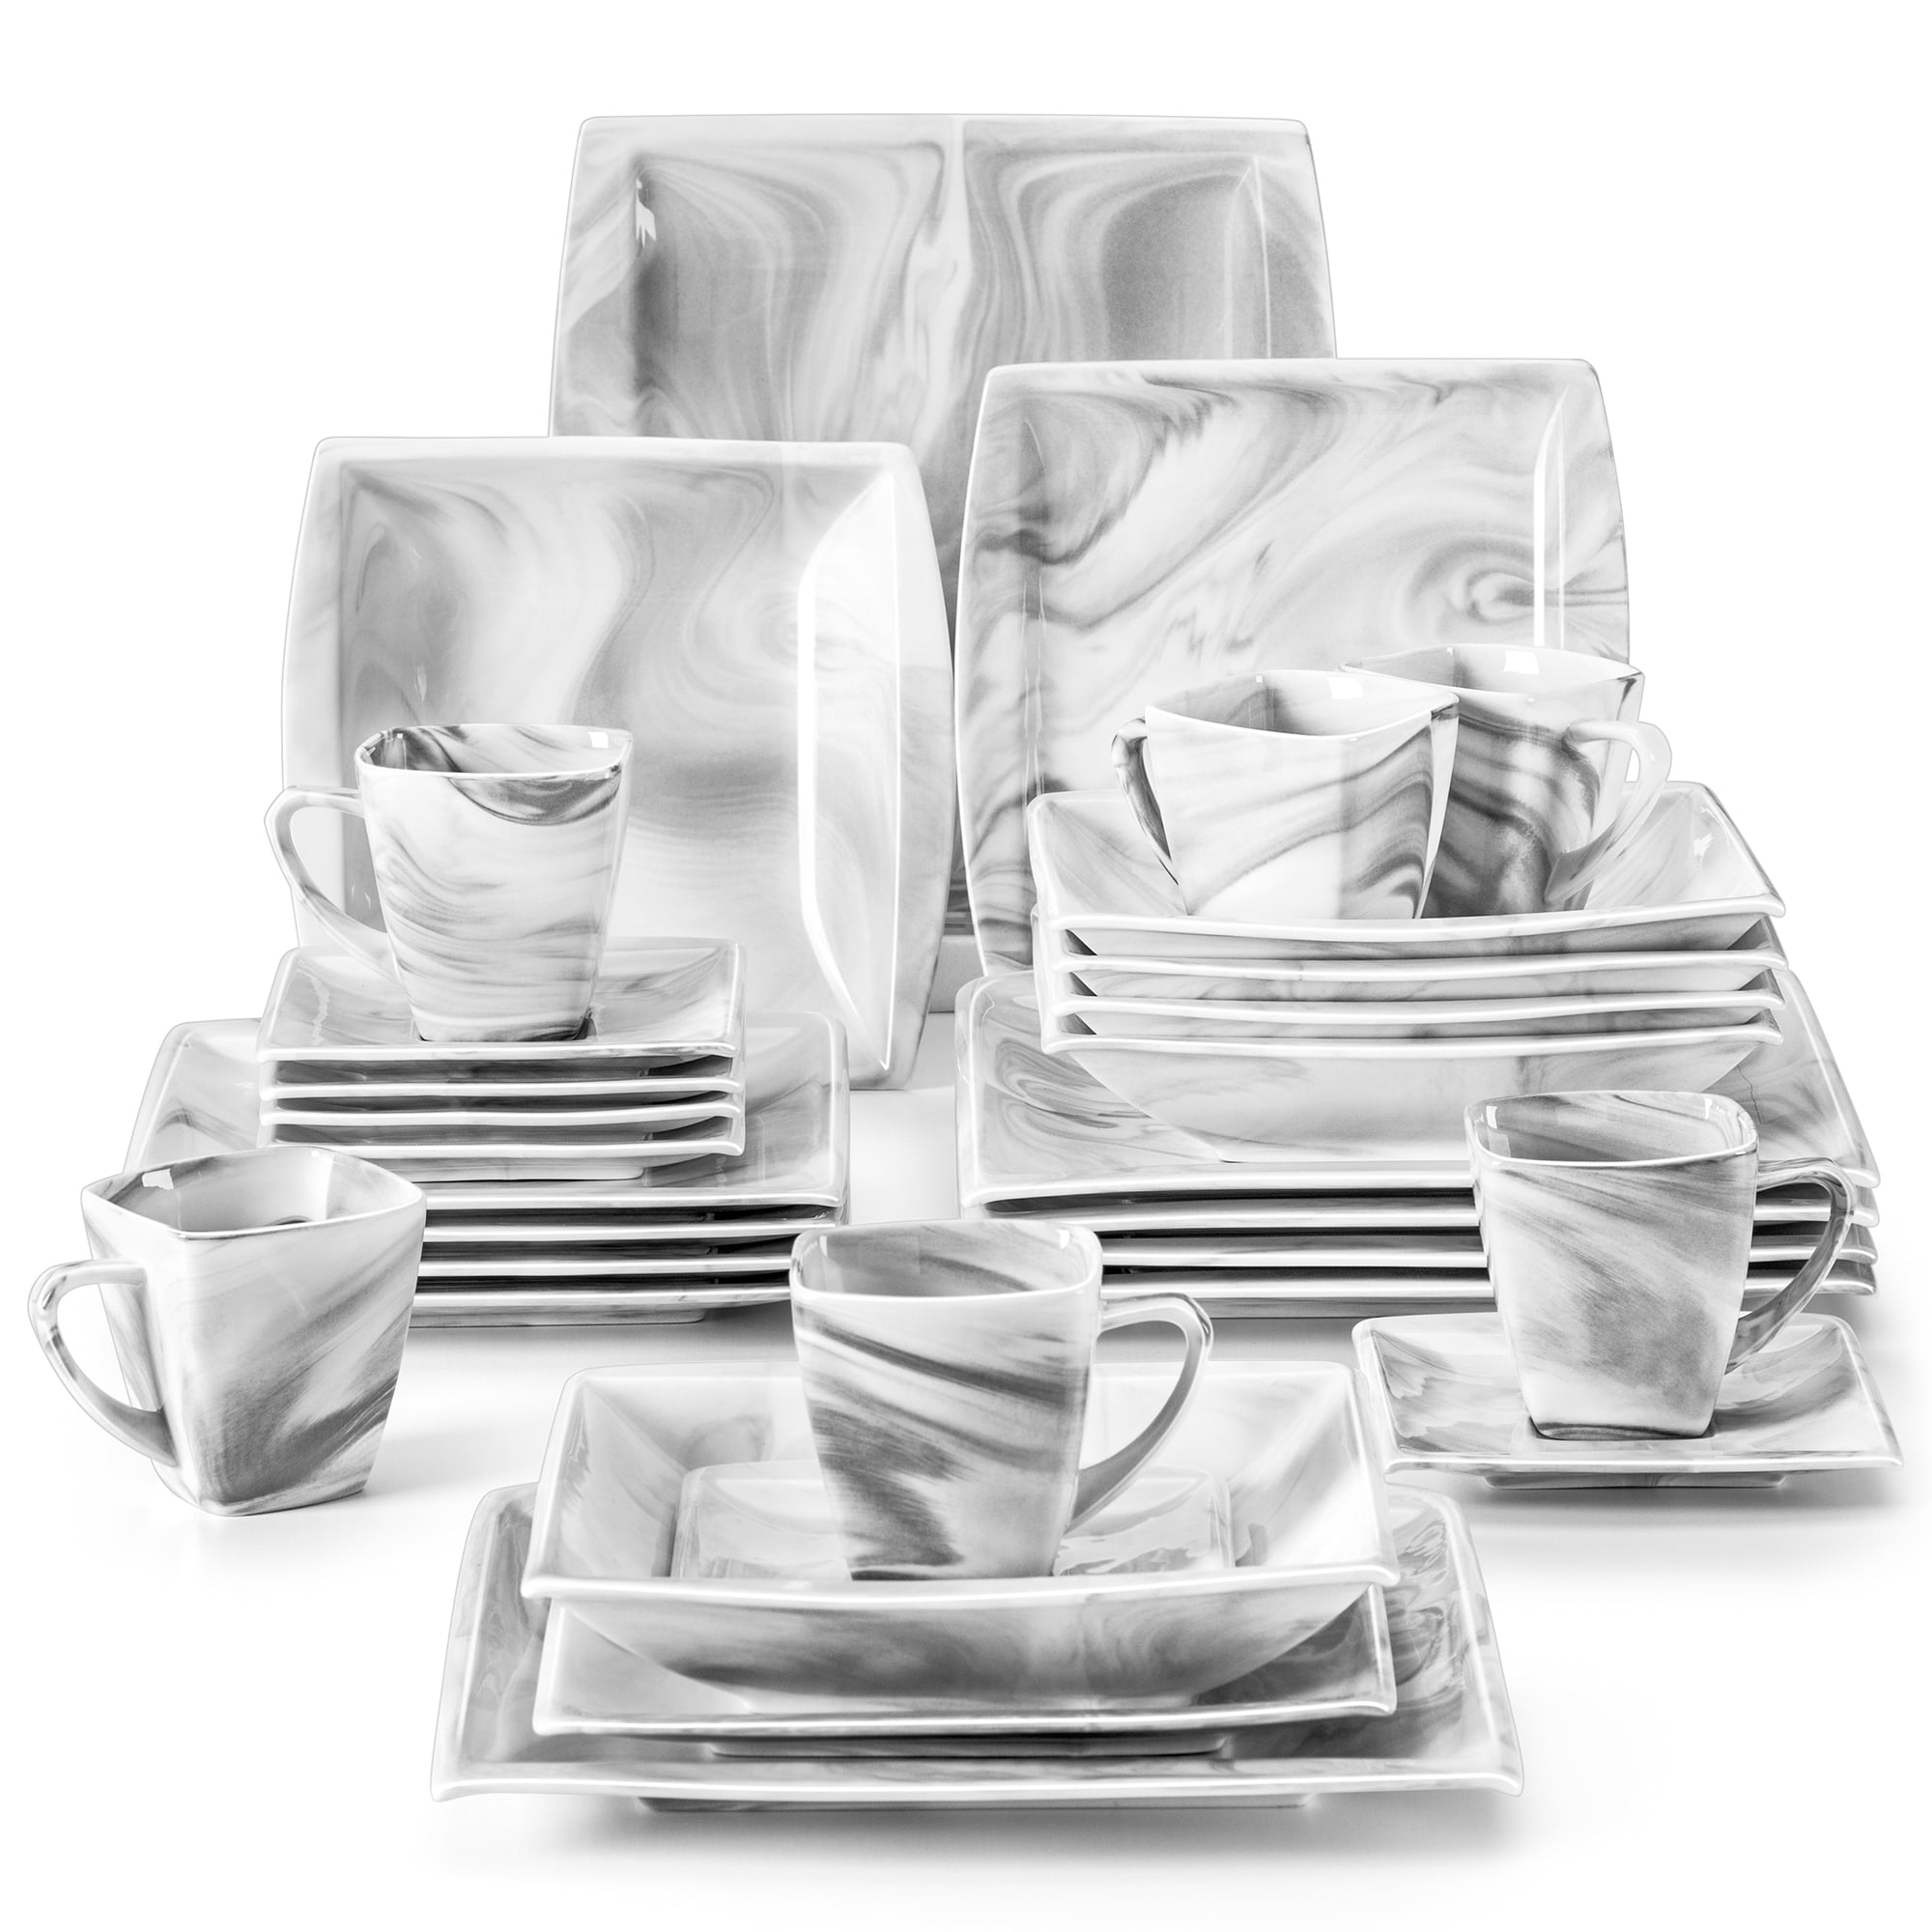 MALACASA Dinnerware Sets, 18-Piece Porcelain Square Dishes, Gray White with  Red Rim, Modern Dish Set for 6 - Plates and Bowls Sets, Ideal for Dessert